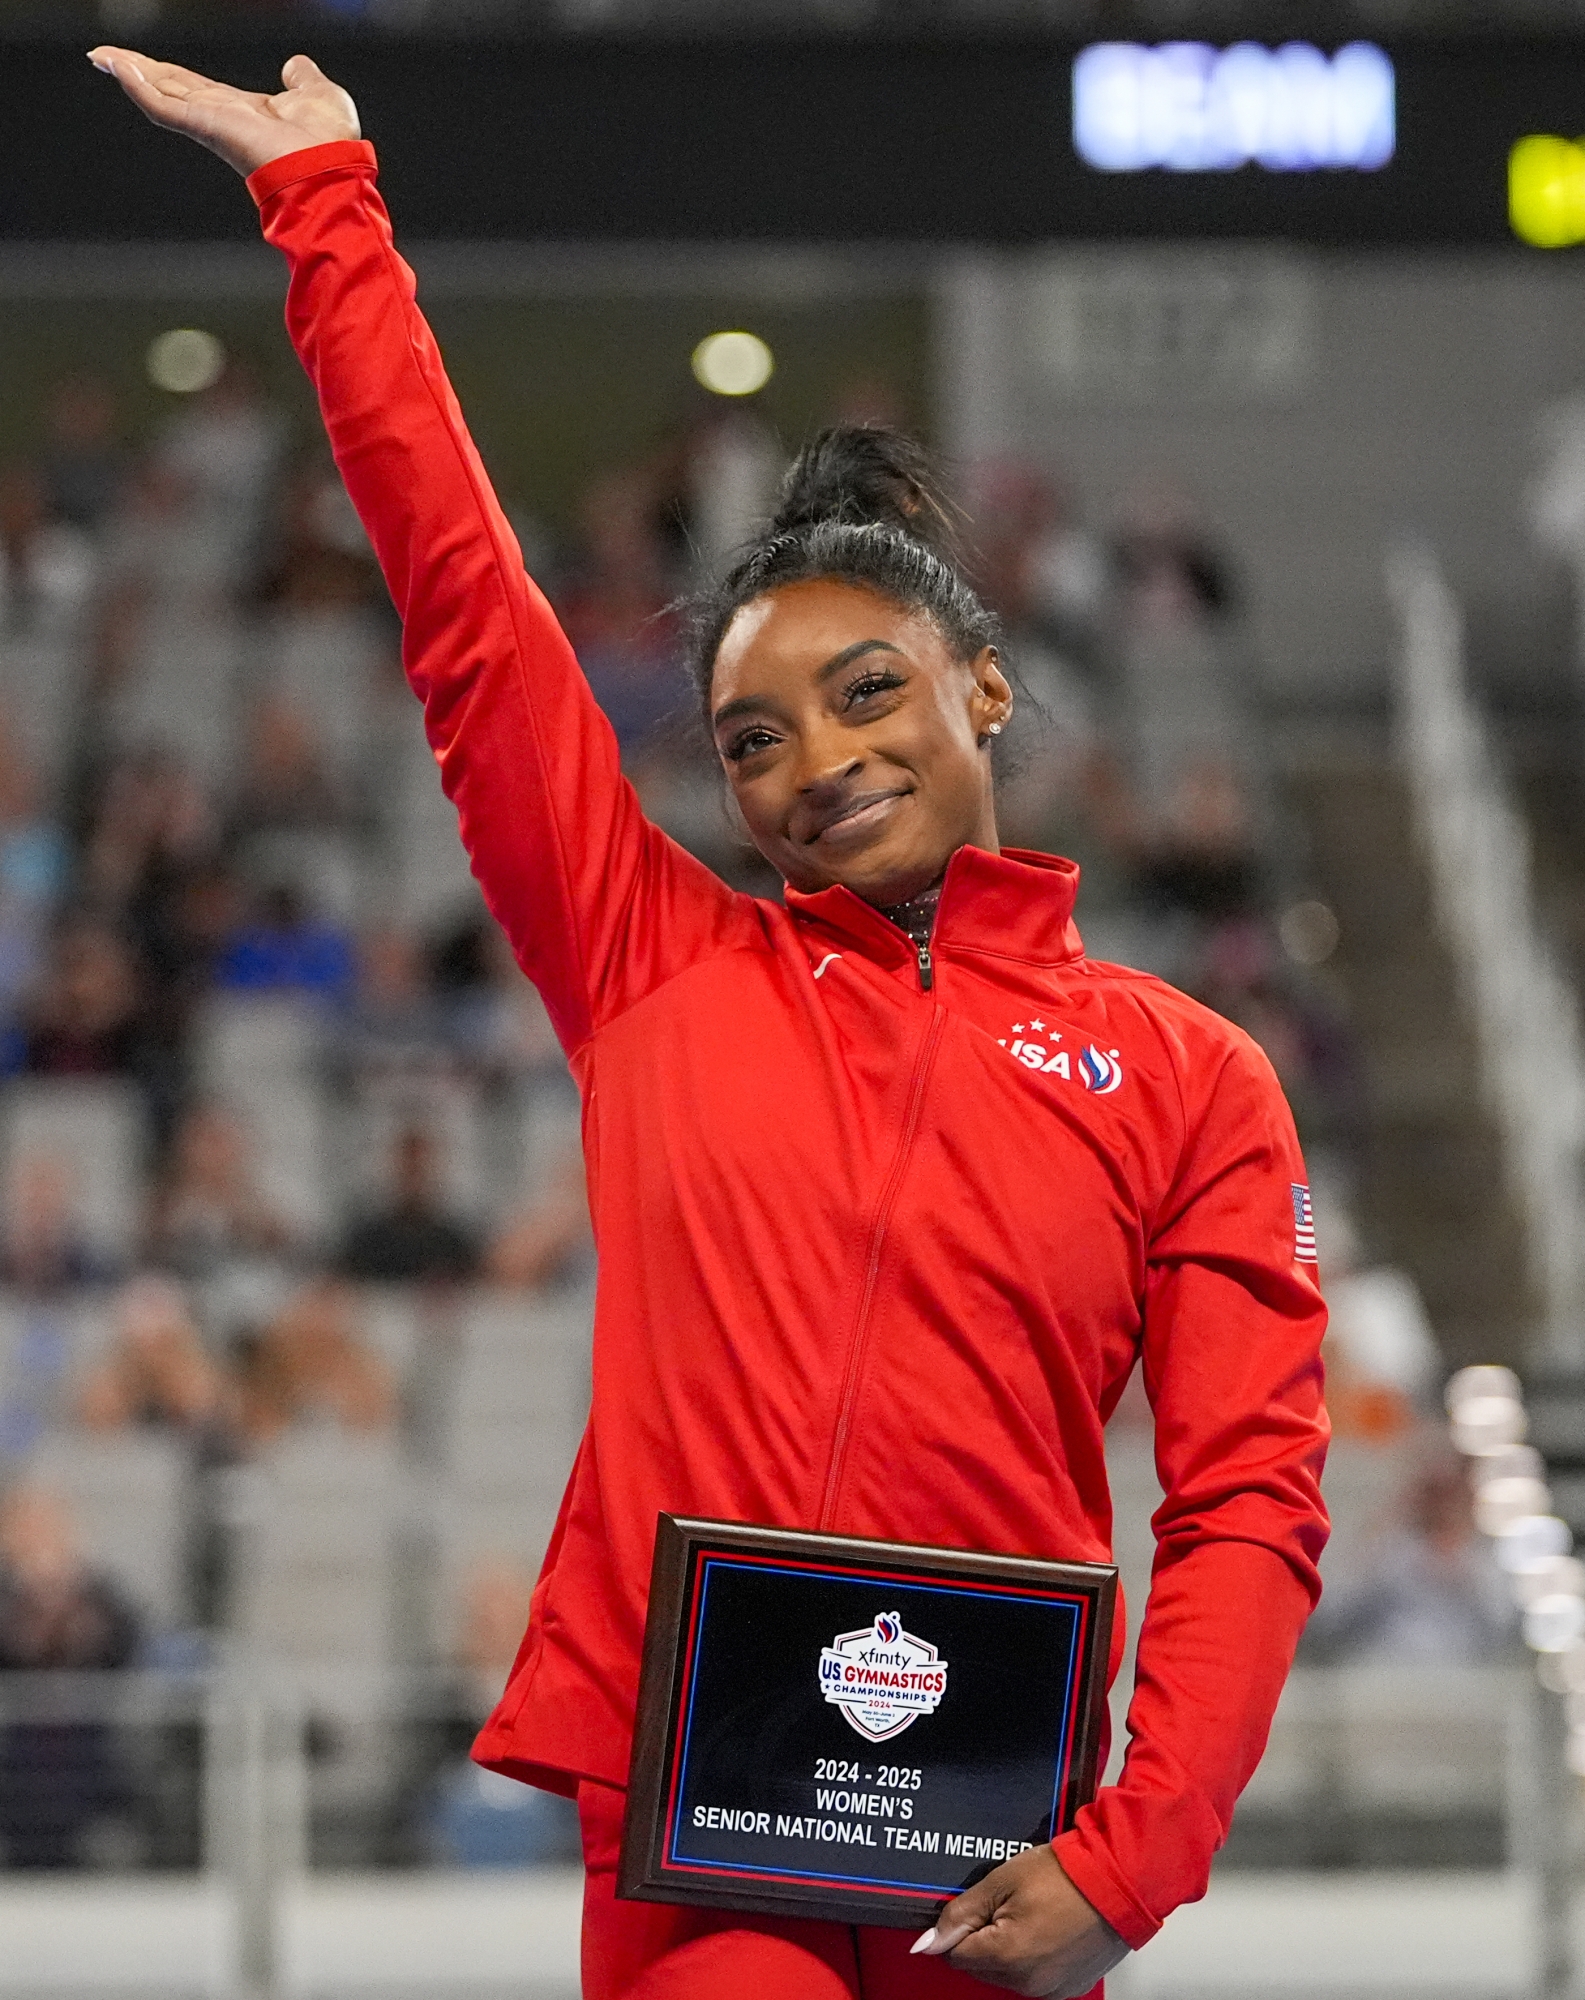 Simone Biles reacts after being named to the U.S. women's senior national team during the U.S. Gymnastics Championships, Sunday, June 2, 2024, in Fort Worth, Texas. (AP Photo/Julio Cortez)